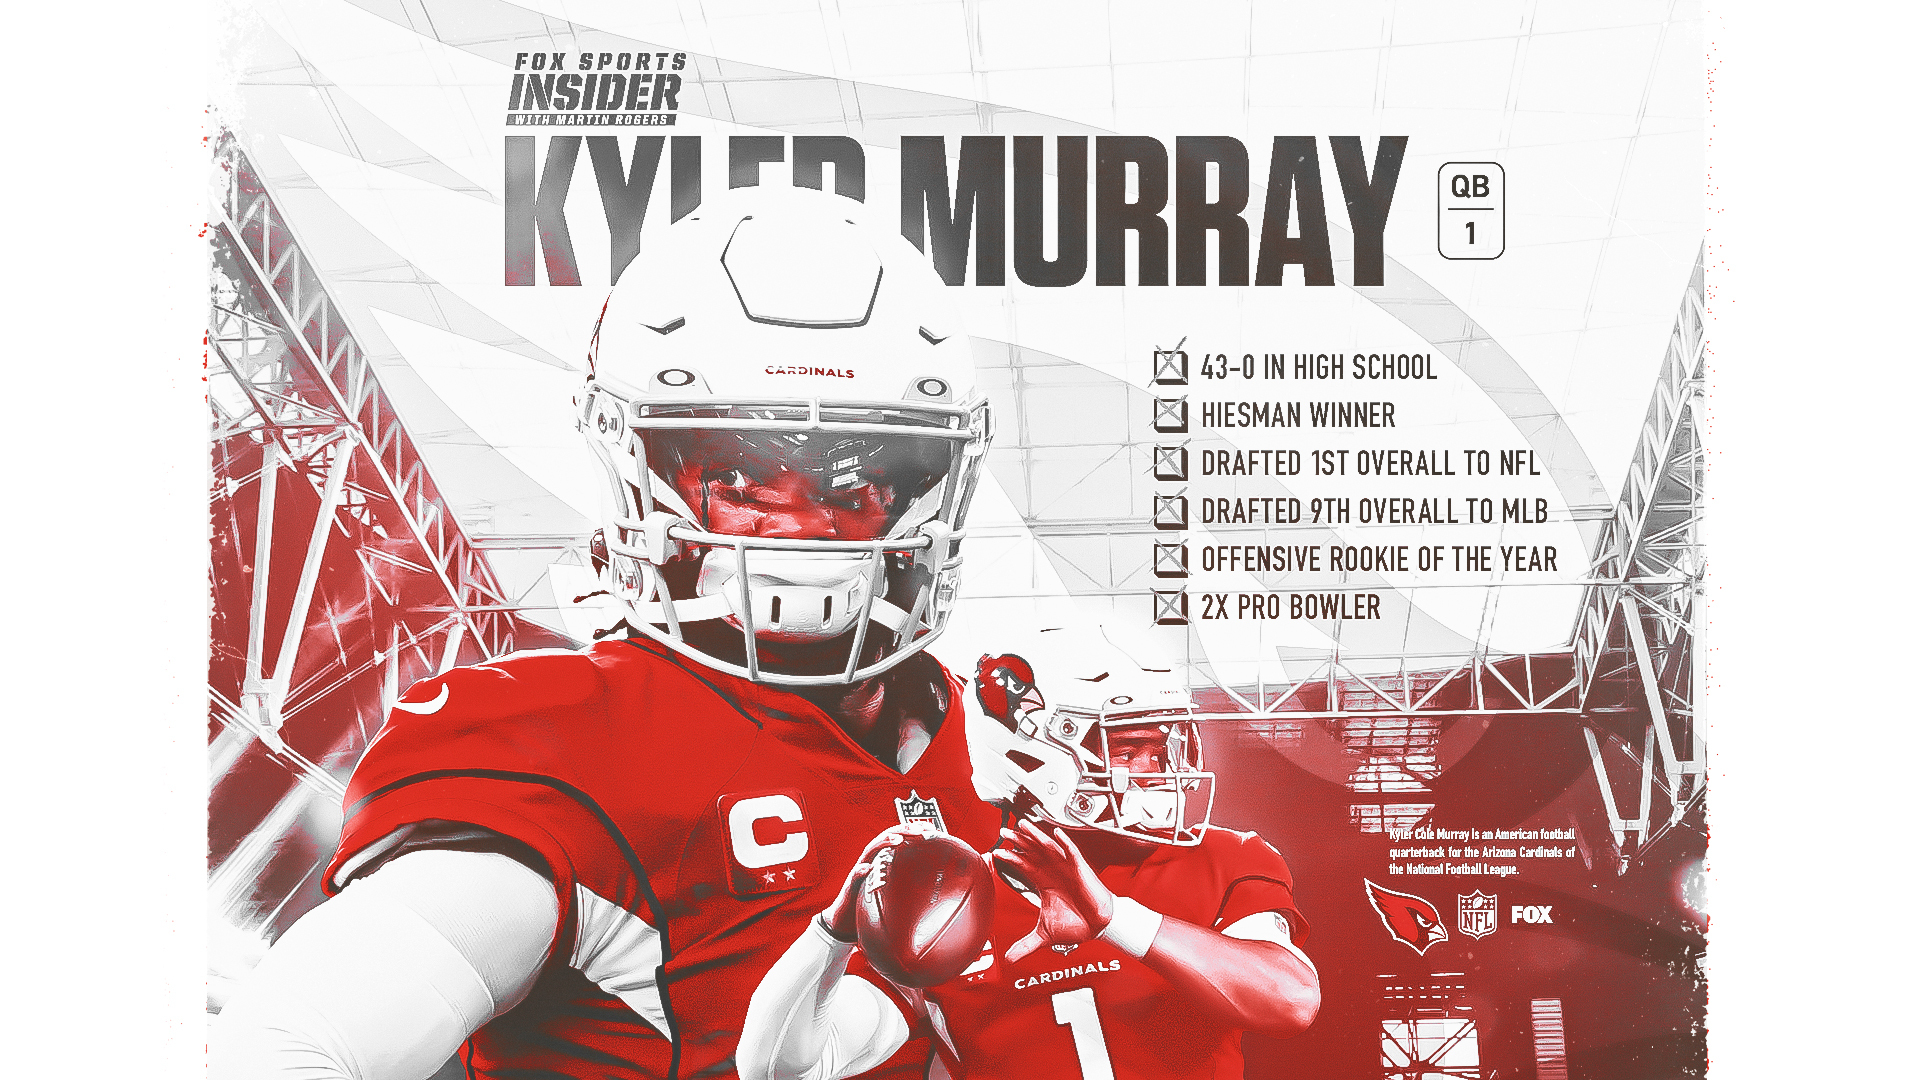 Kyler Murray is directing 'homework clause' anger at the wrong target